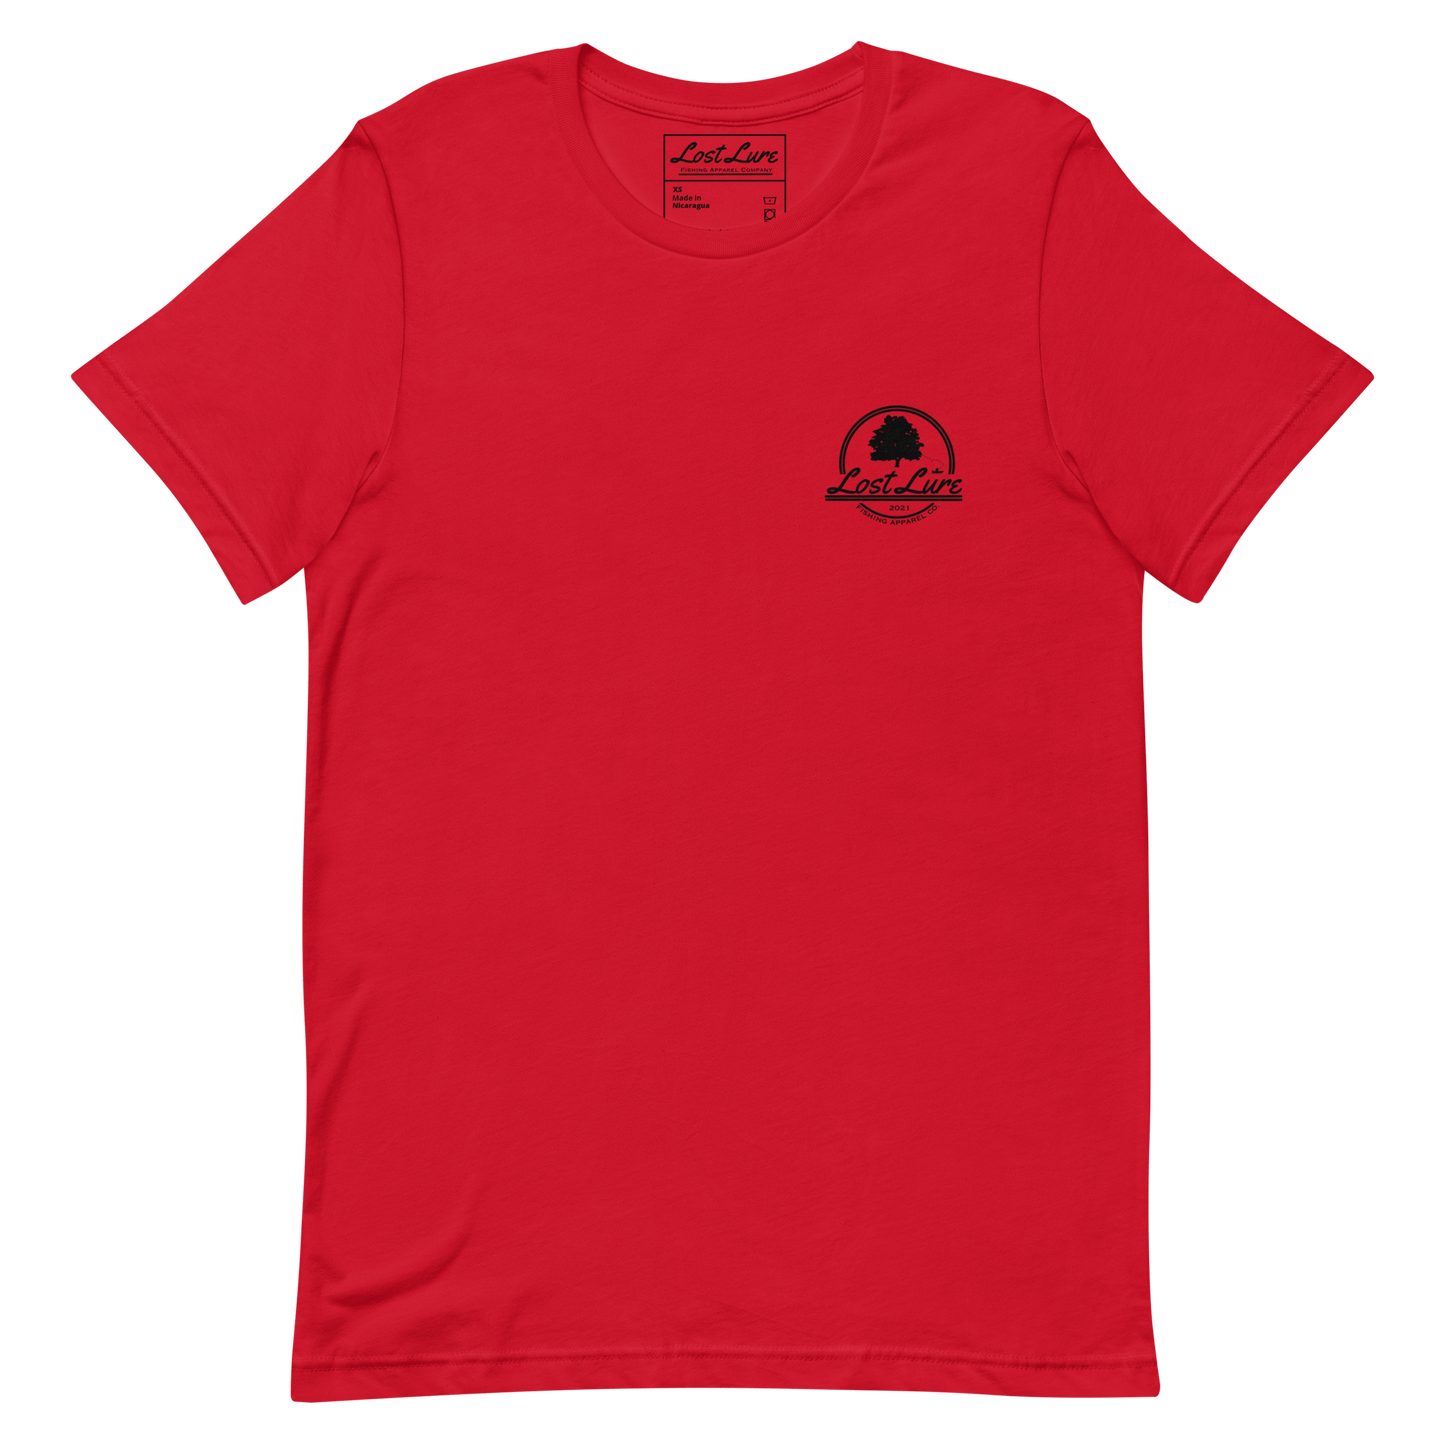 Bass fishing shirt. It has a drawing of a fat bass and it reads “lost lure co, catch fat fish”. The bass design is on the back, the lost lure logo is on the front. Red shirt, front side